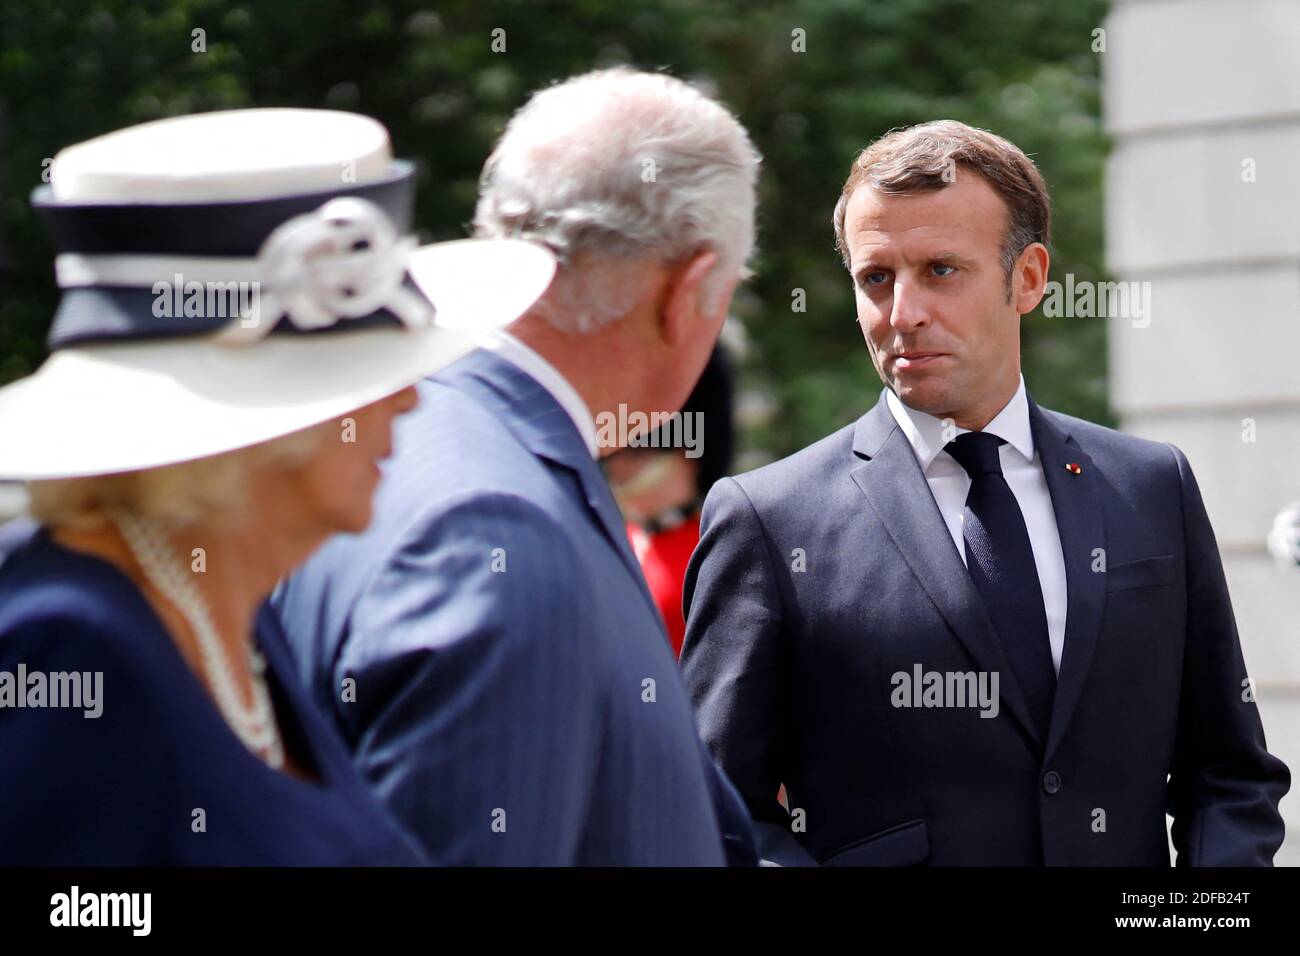 Britain's Prince Charles, Prince of Wales (C) and French President Emmanuel Macron (R) lay wreaths at the statue of former French president Charles de Gaulle at Carlton Gardens in central London on June 18, 2020 during a visit to mark the anniversary of former de Gaulle's appeal to French people to resist the Nazi occupation. - Macron visited London on June 18 to commemorate the 80th anniversary of former French president Charles de Gaulle's appeal to French people to resist the Nazi occupation during World War II. Photo by Tolga AKMEN/Pool/ABACAPRESS.COM Stock Photo